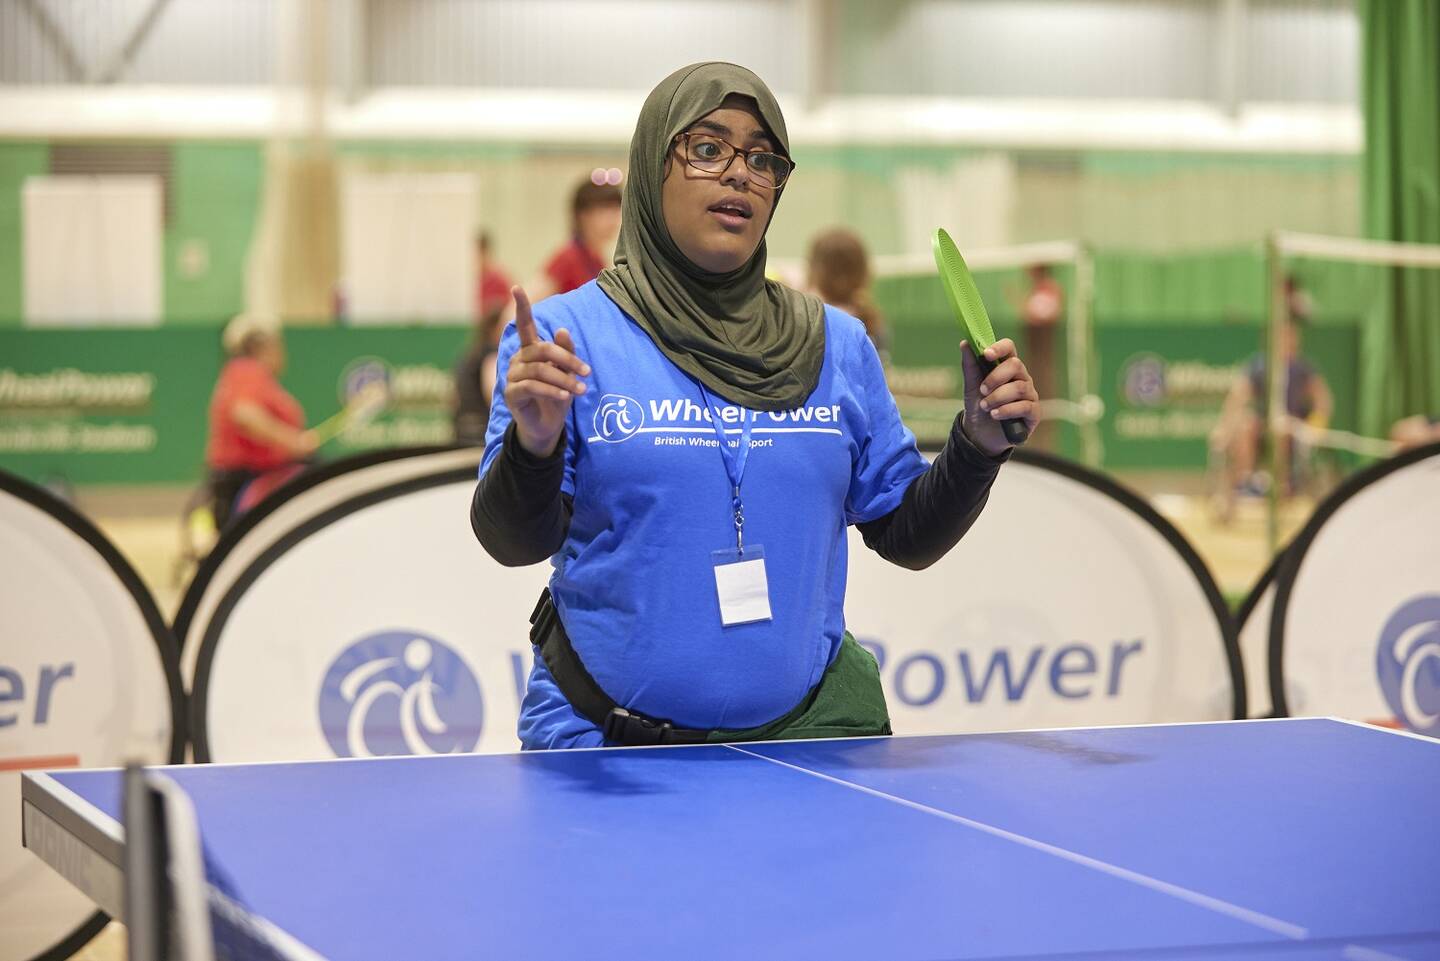 Girl playing table tennis at WheelPower National Junior Games 2022